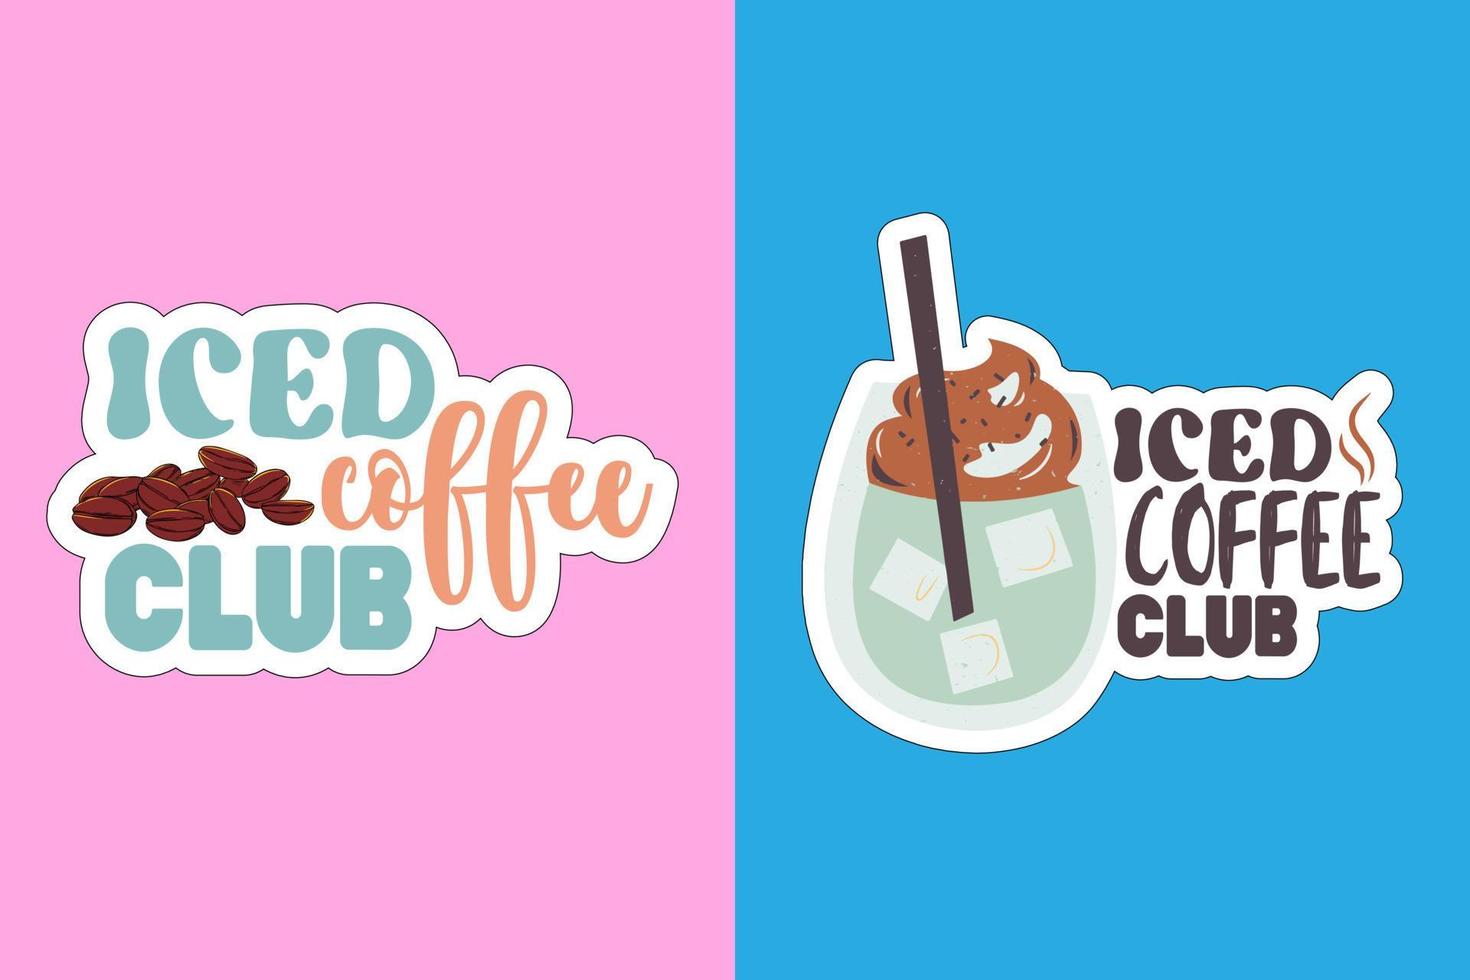 Iced coffee stickers vector design on colorful background